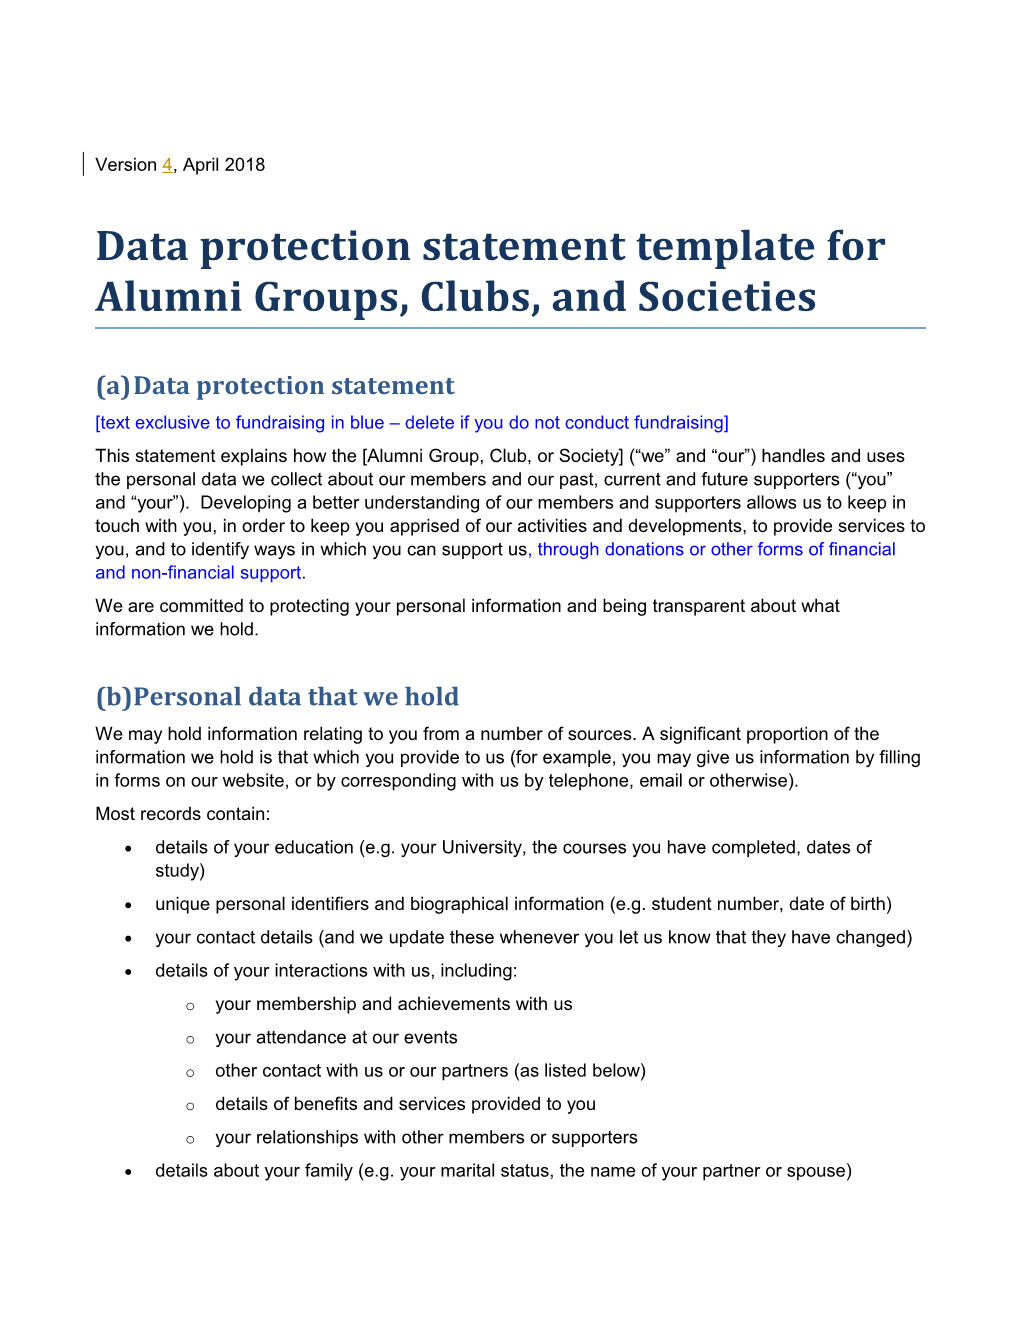 Data Protection Statement Template for Alumni Groups, Clubs, and Societies